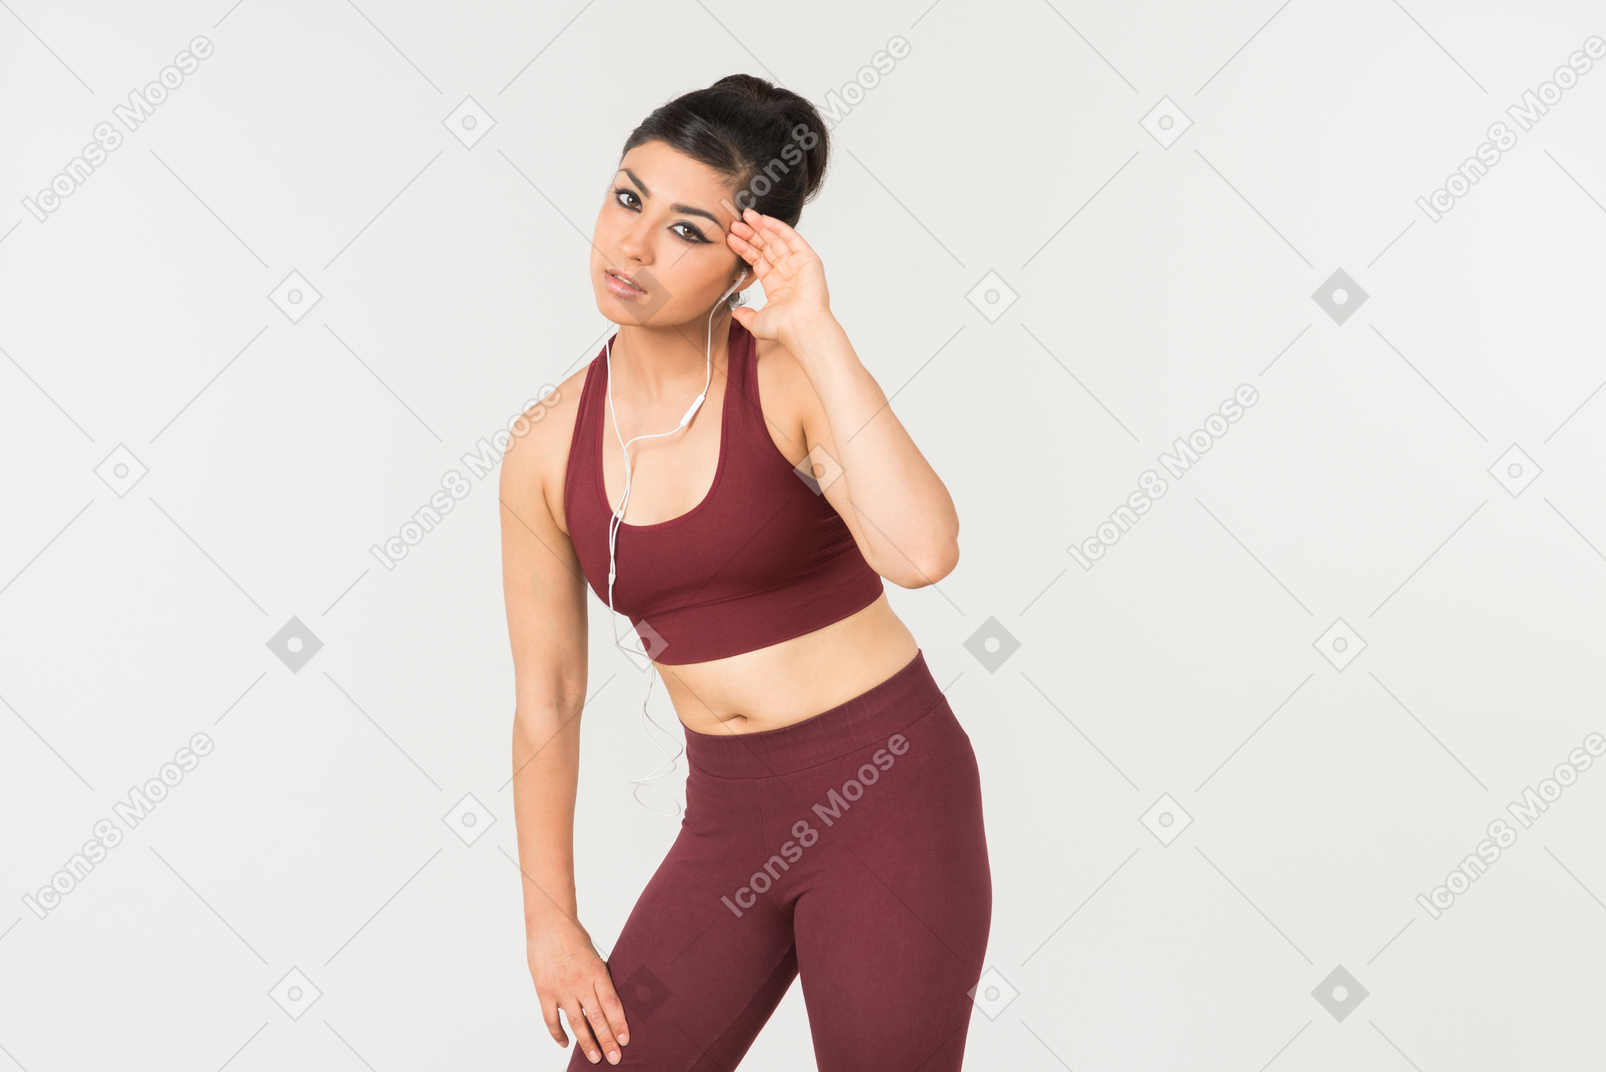 Tired looking young indian woman in sporstwear standing with headphones on her neck